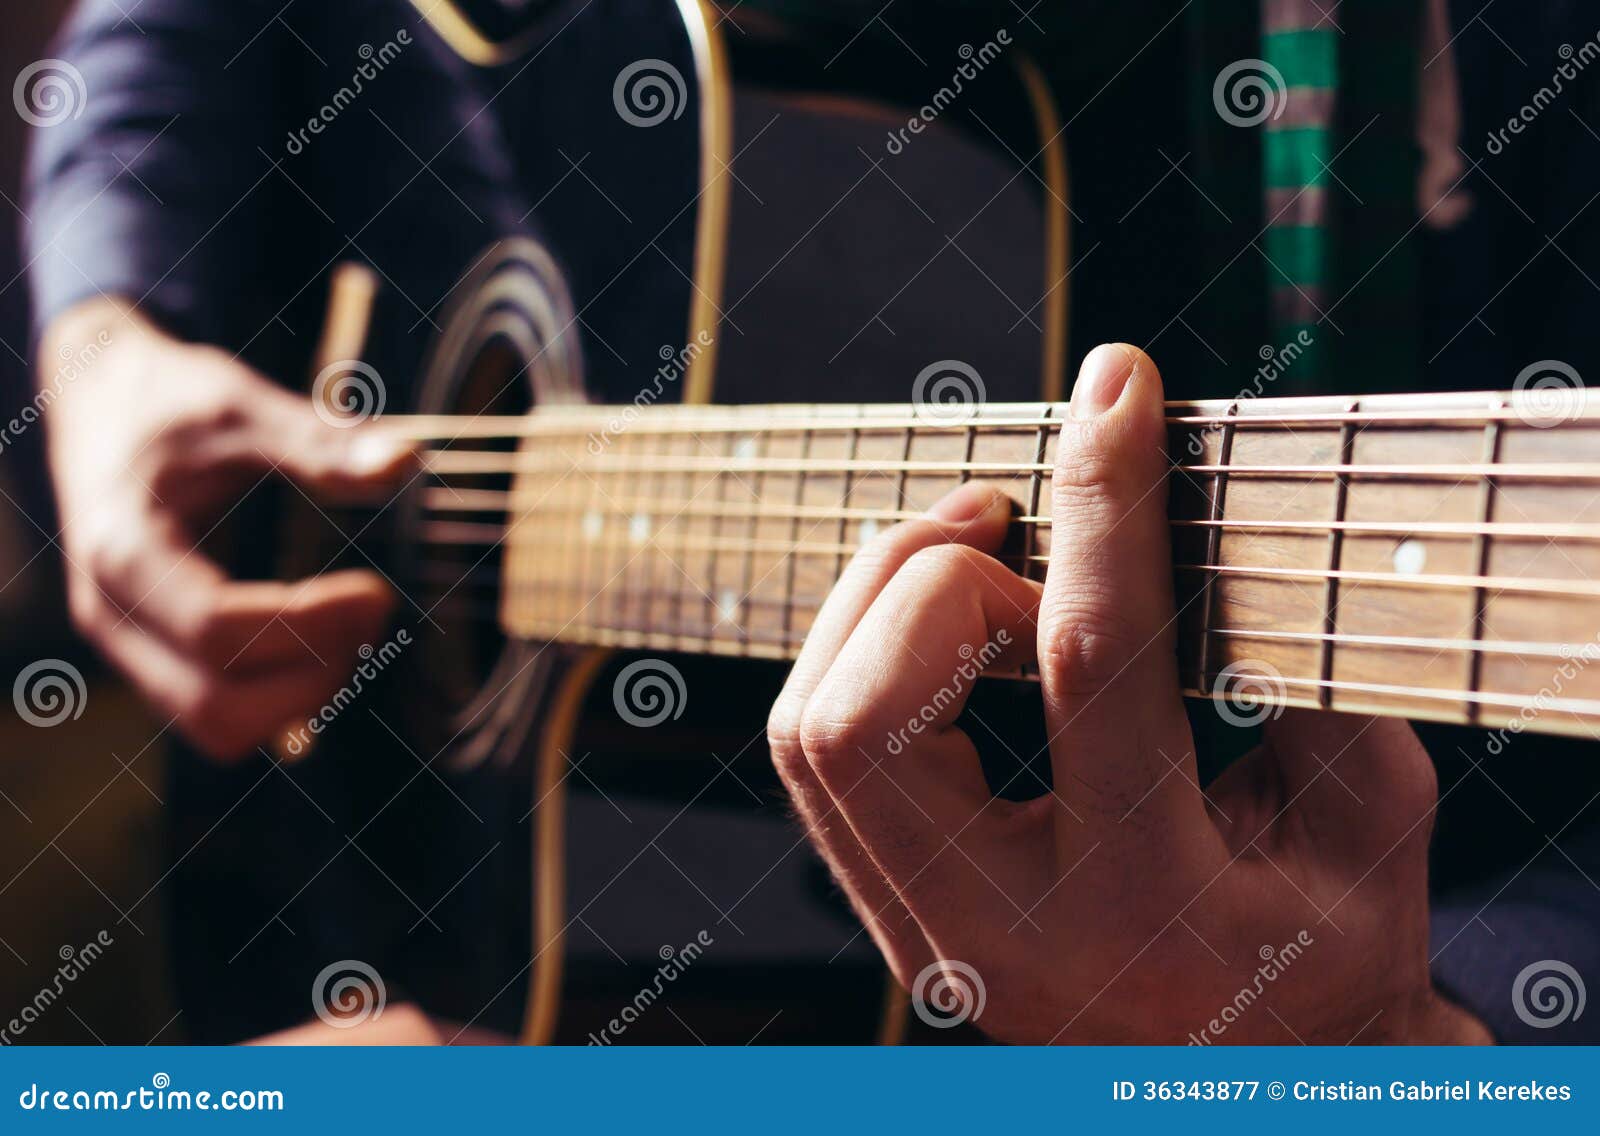 man playing music at black wooden acoustic guitar